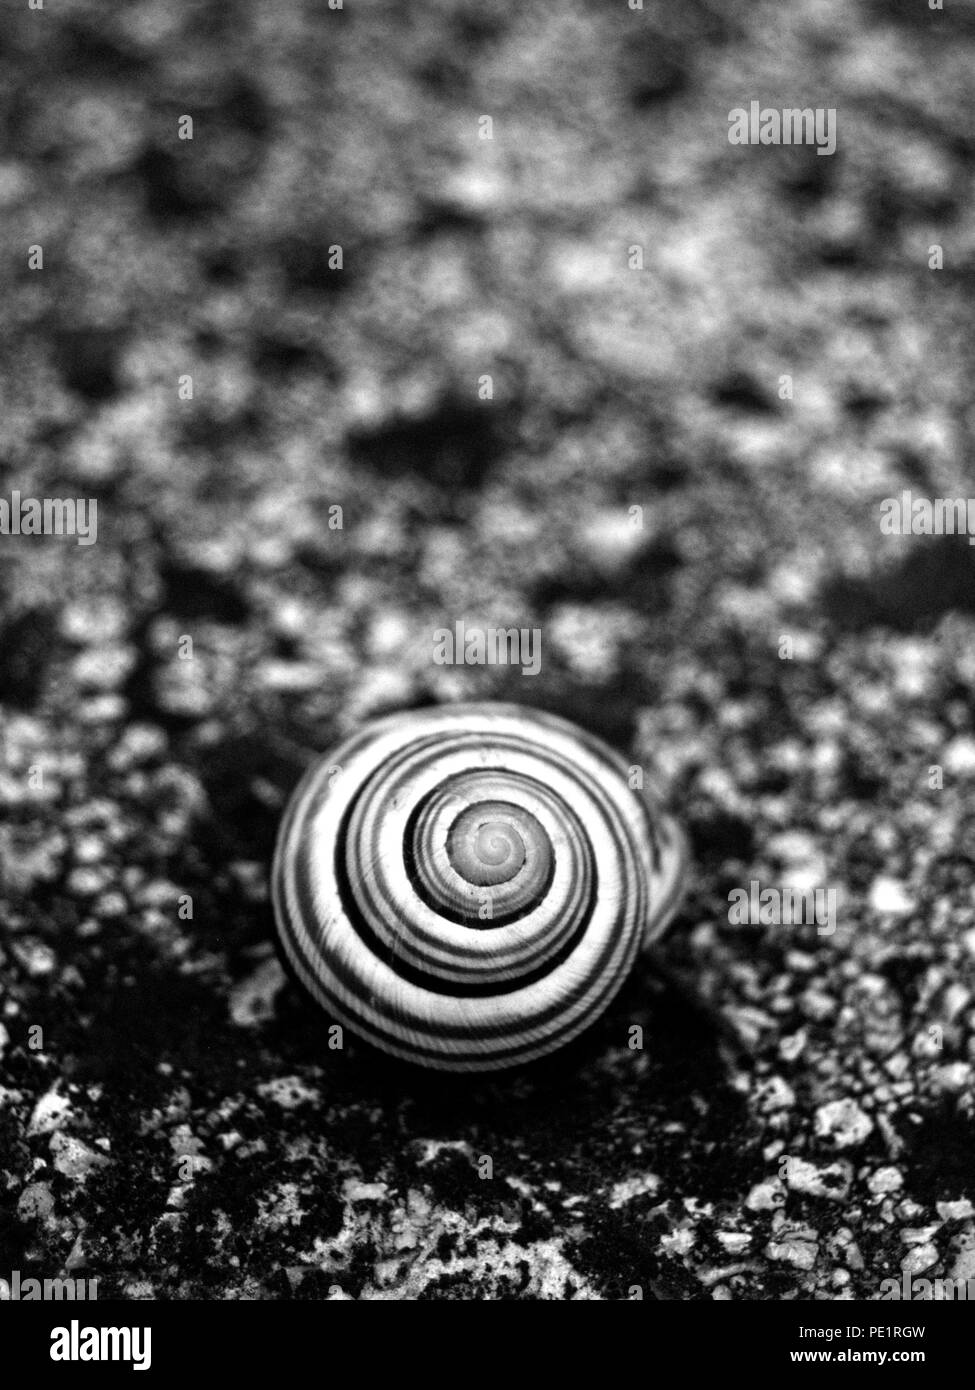 Black and white snail on concrete surface. Stock Photo